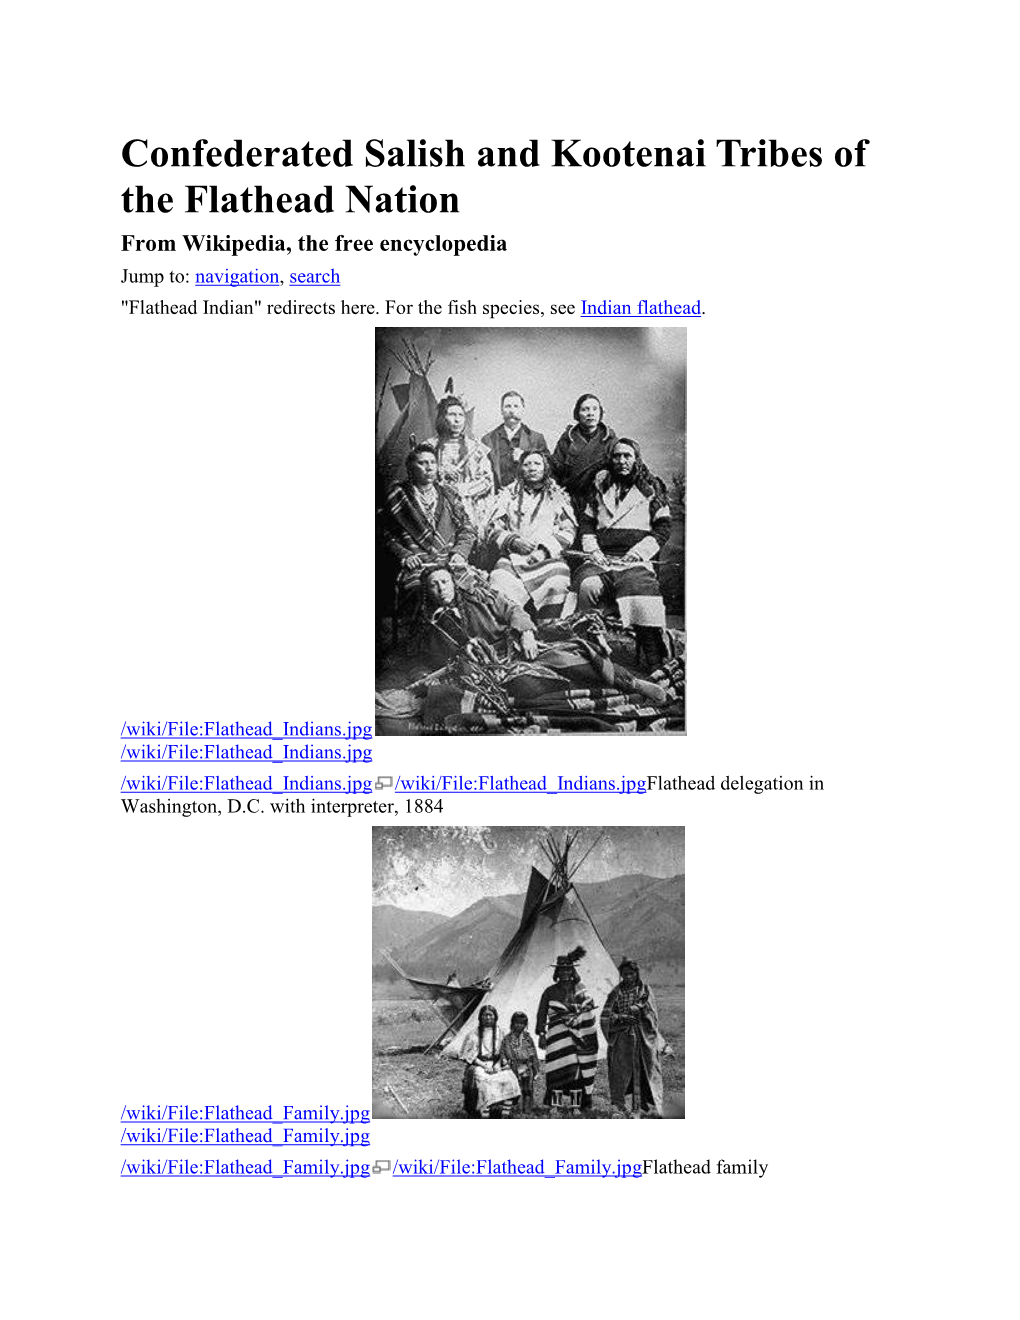 Confederated Salish and Kootenai Tribes of the Flathead Nation from Wikipedia, the Free Encyclopedia Jump To: Navigation, Search "Flathead Indian" Redirects Here